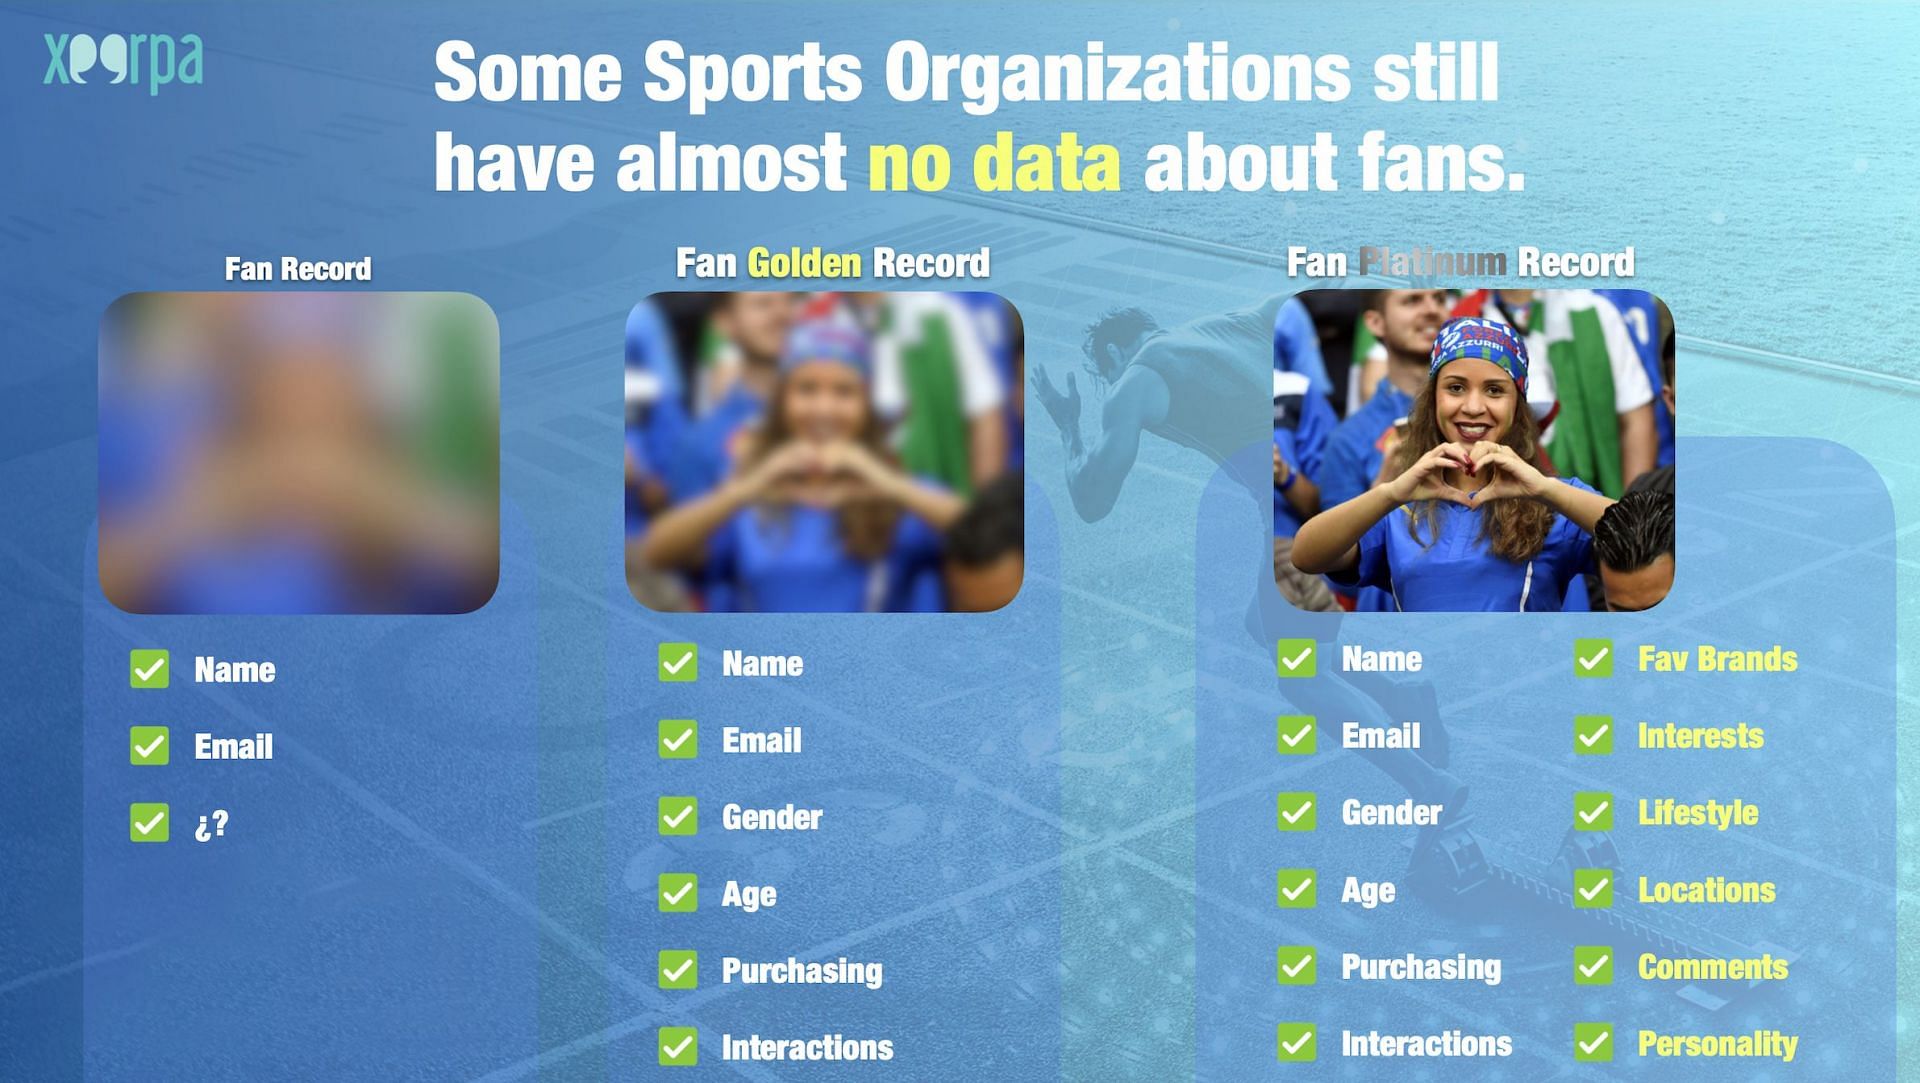 Xeerpa provides data to help clubs understand interest of fans (Image via Xeerpa)